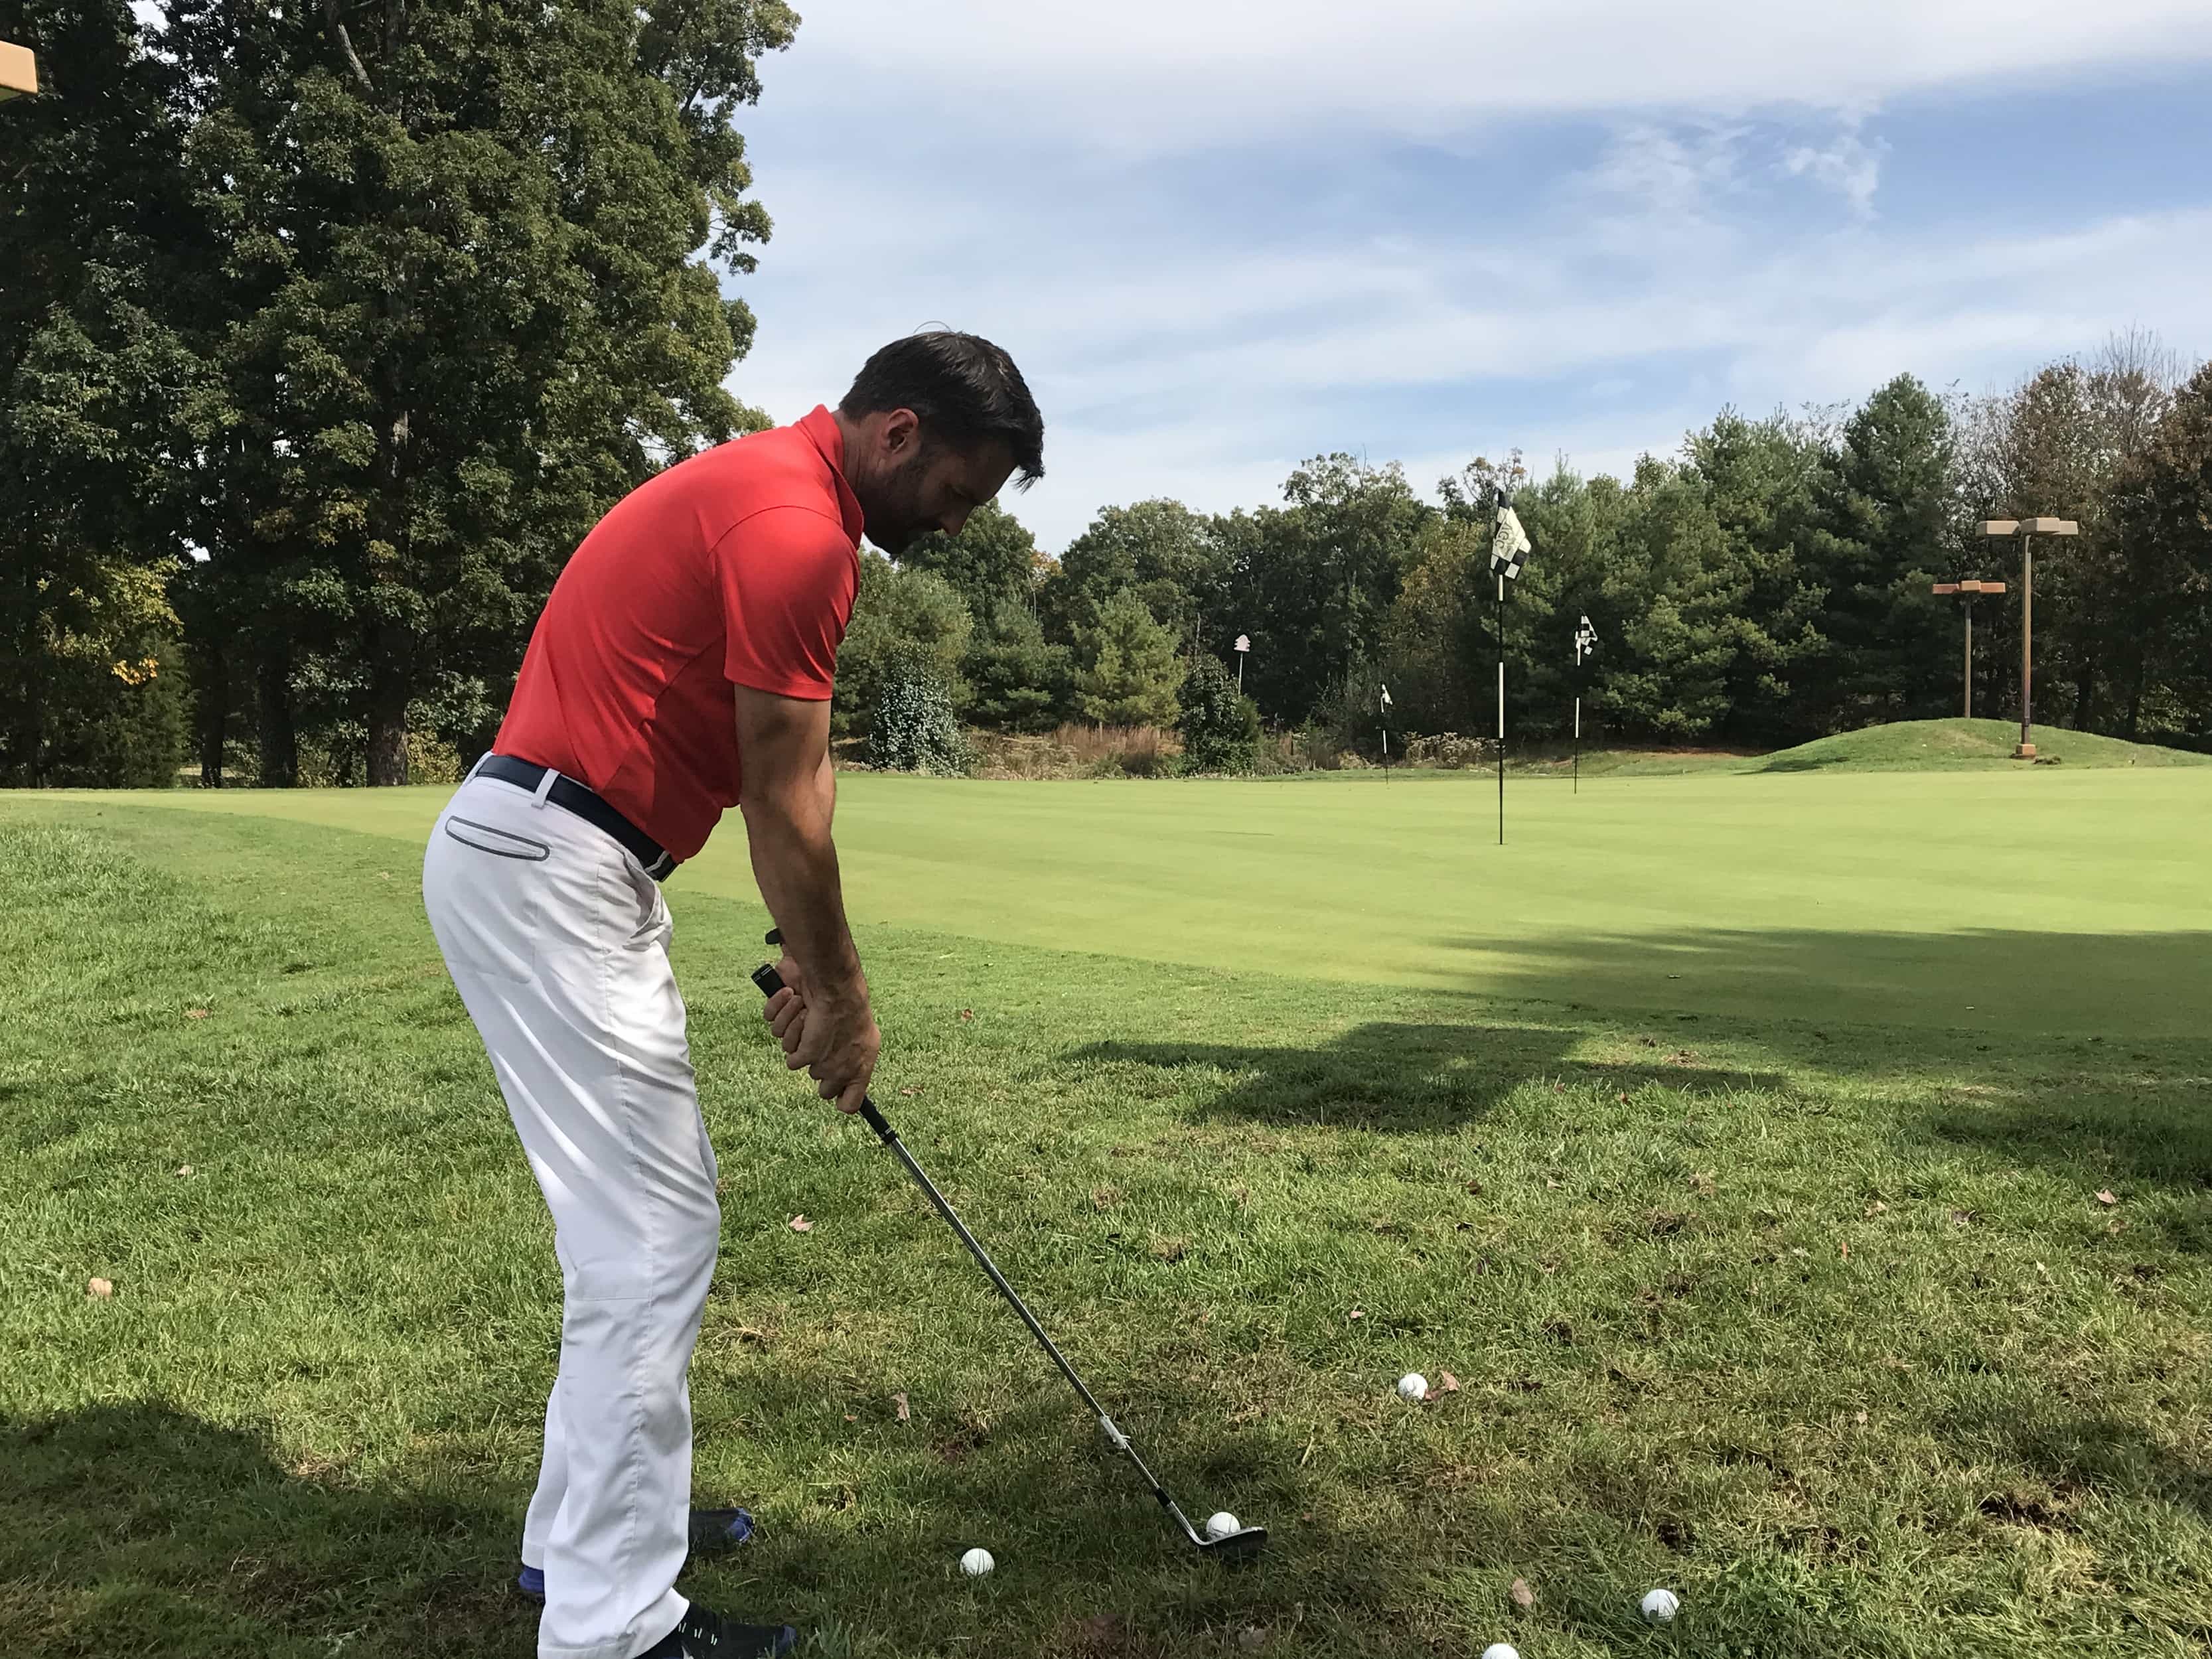 Player practicing golf photo